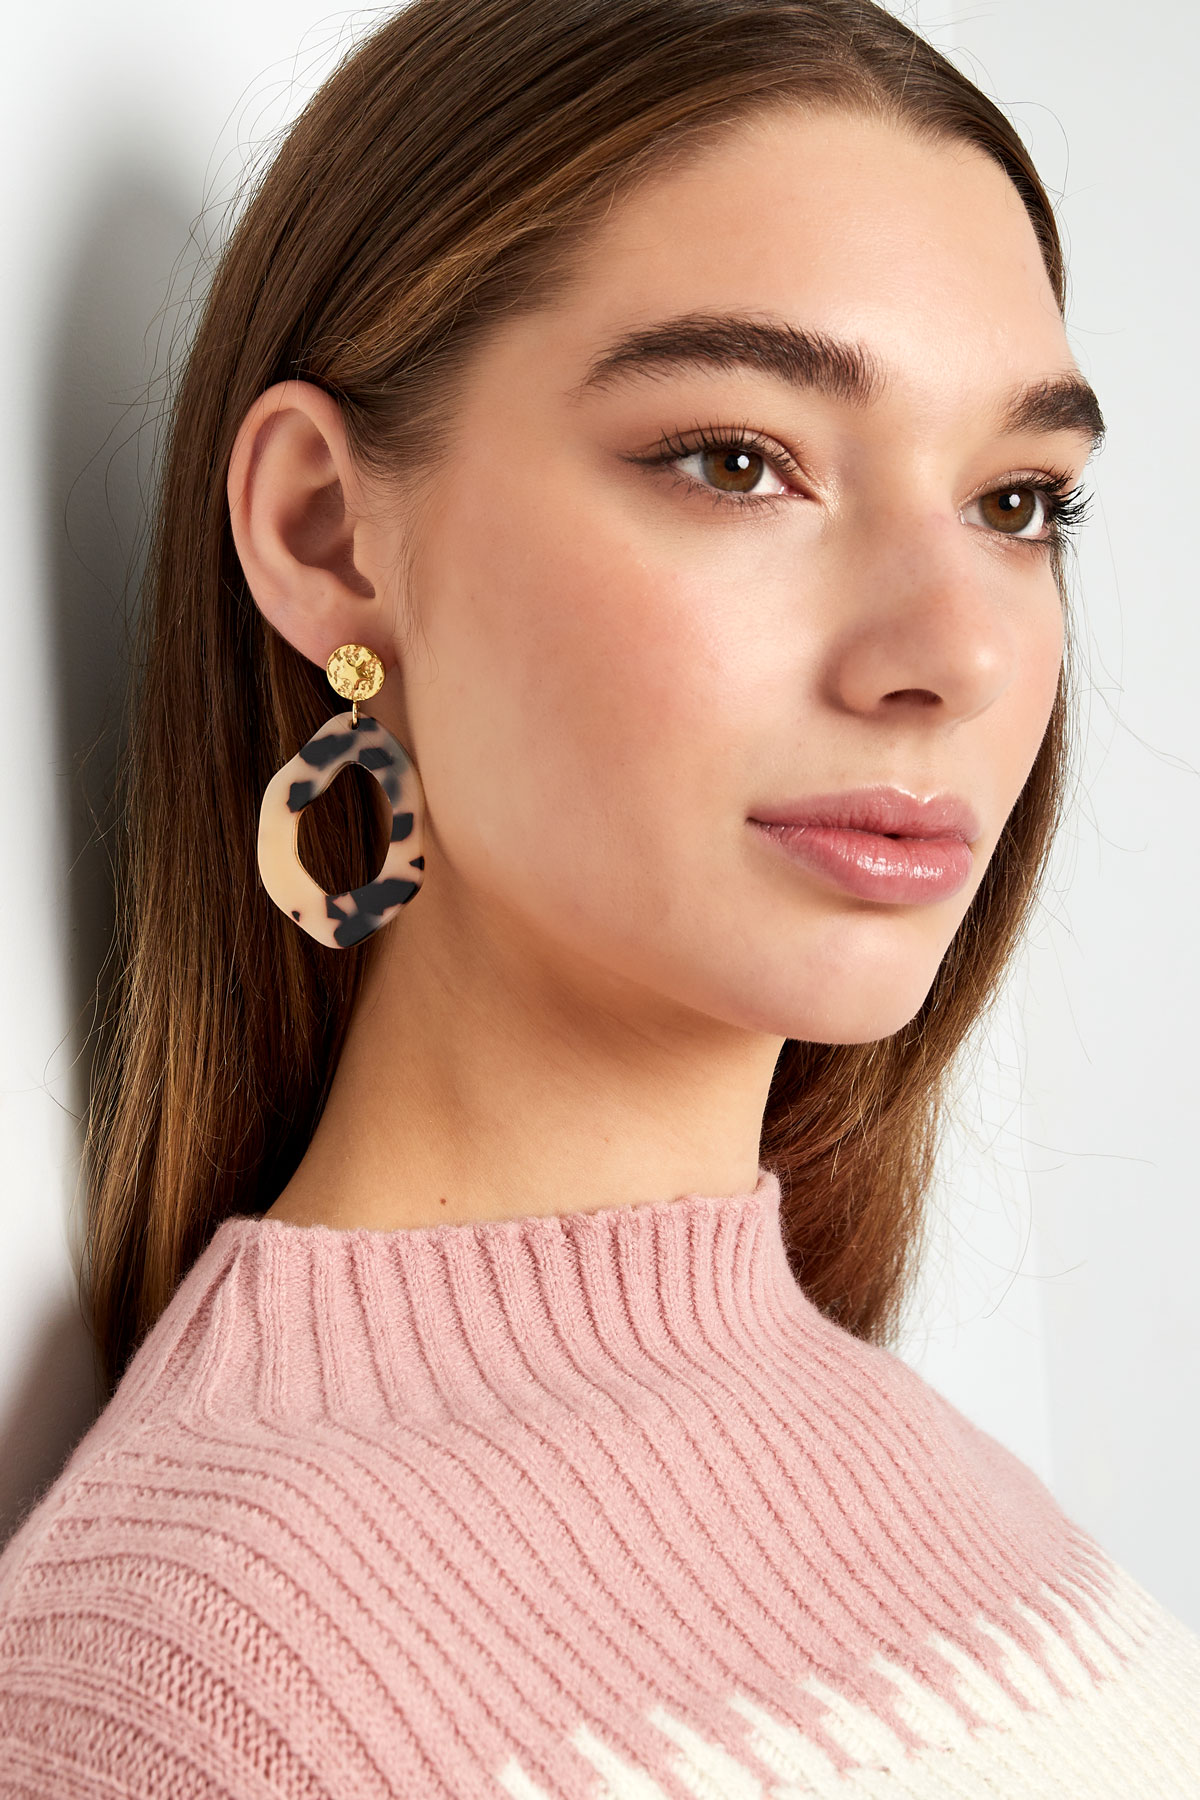 Aesthetic earrings with print - camel/gold h5 Picture7